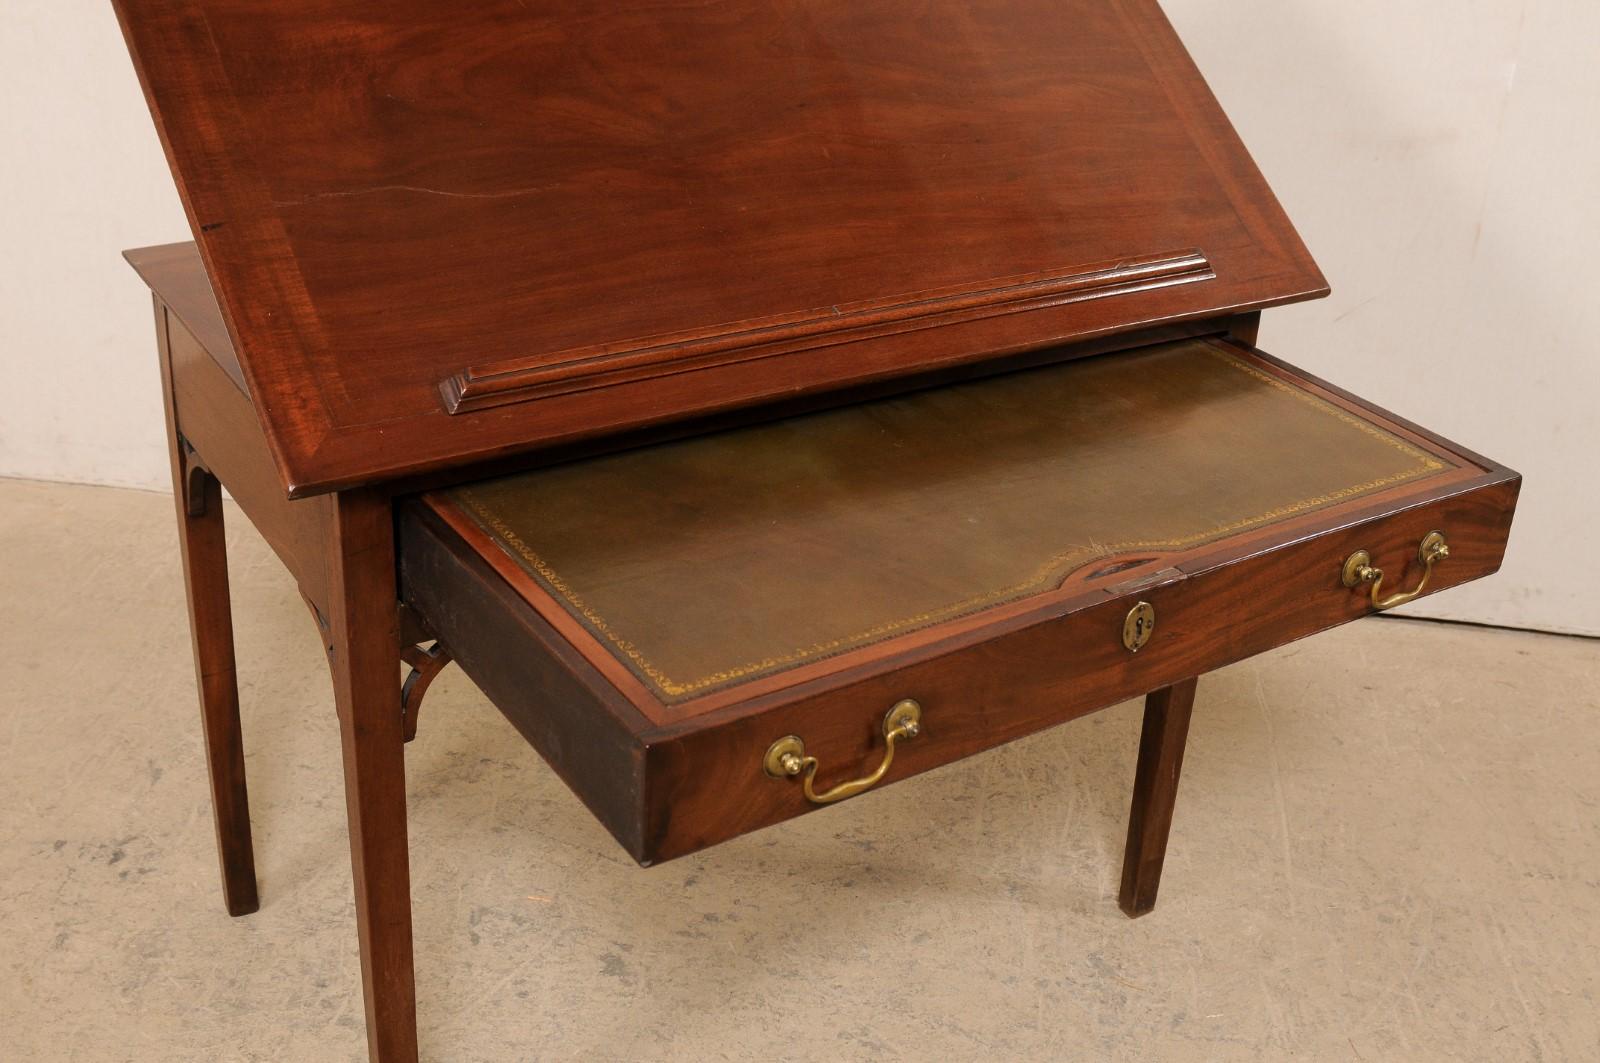 19th C. English Architect's Mahogany Desk w/Leather Writing Pad & Dual Tilt Top In Good Condition For Sale In Atlanta, GA